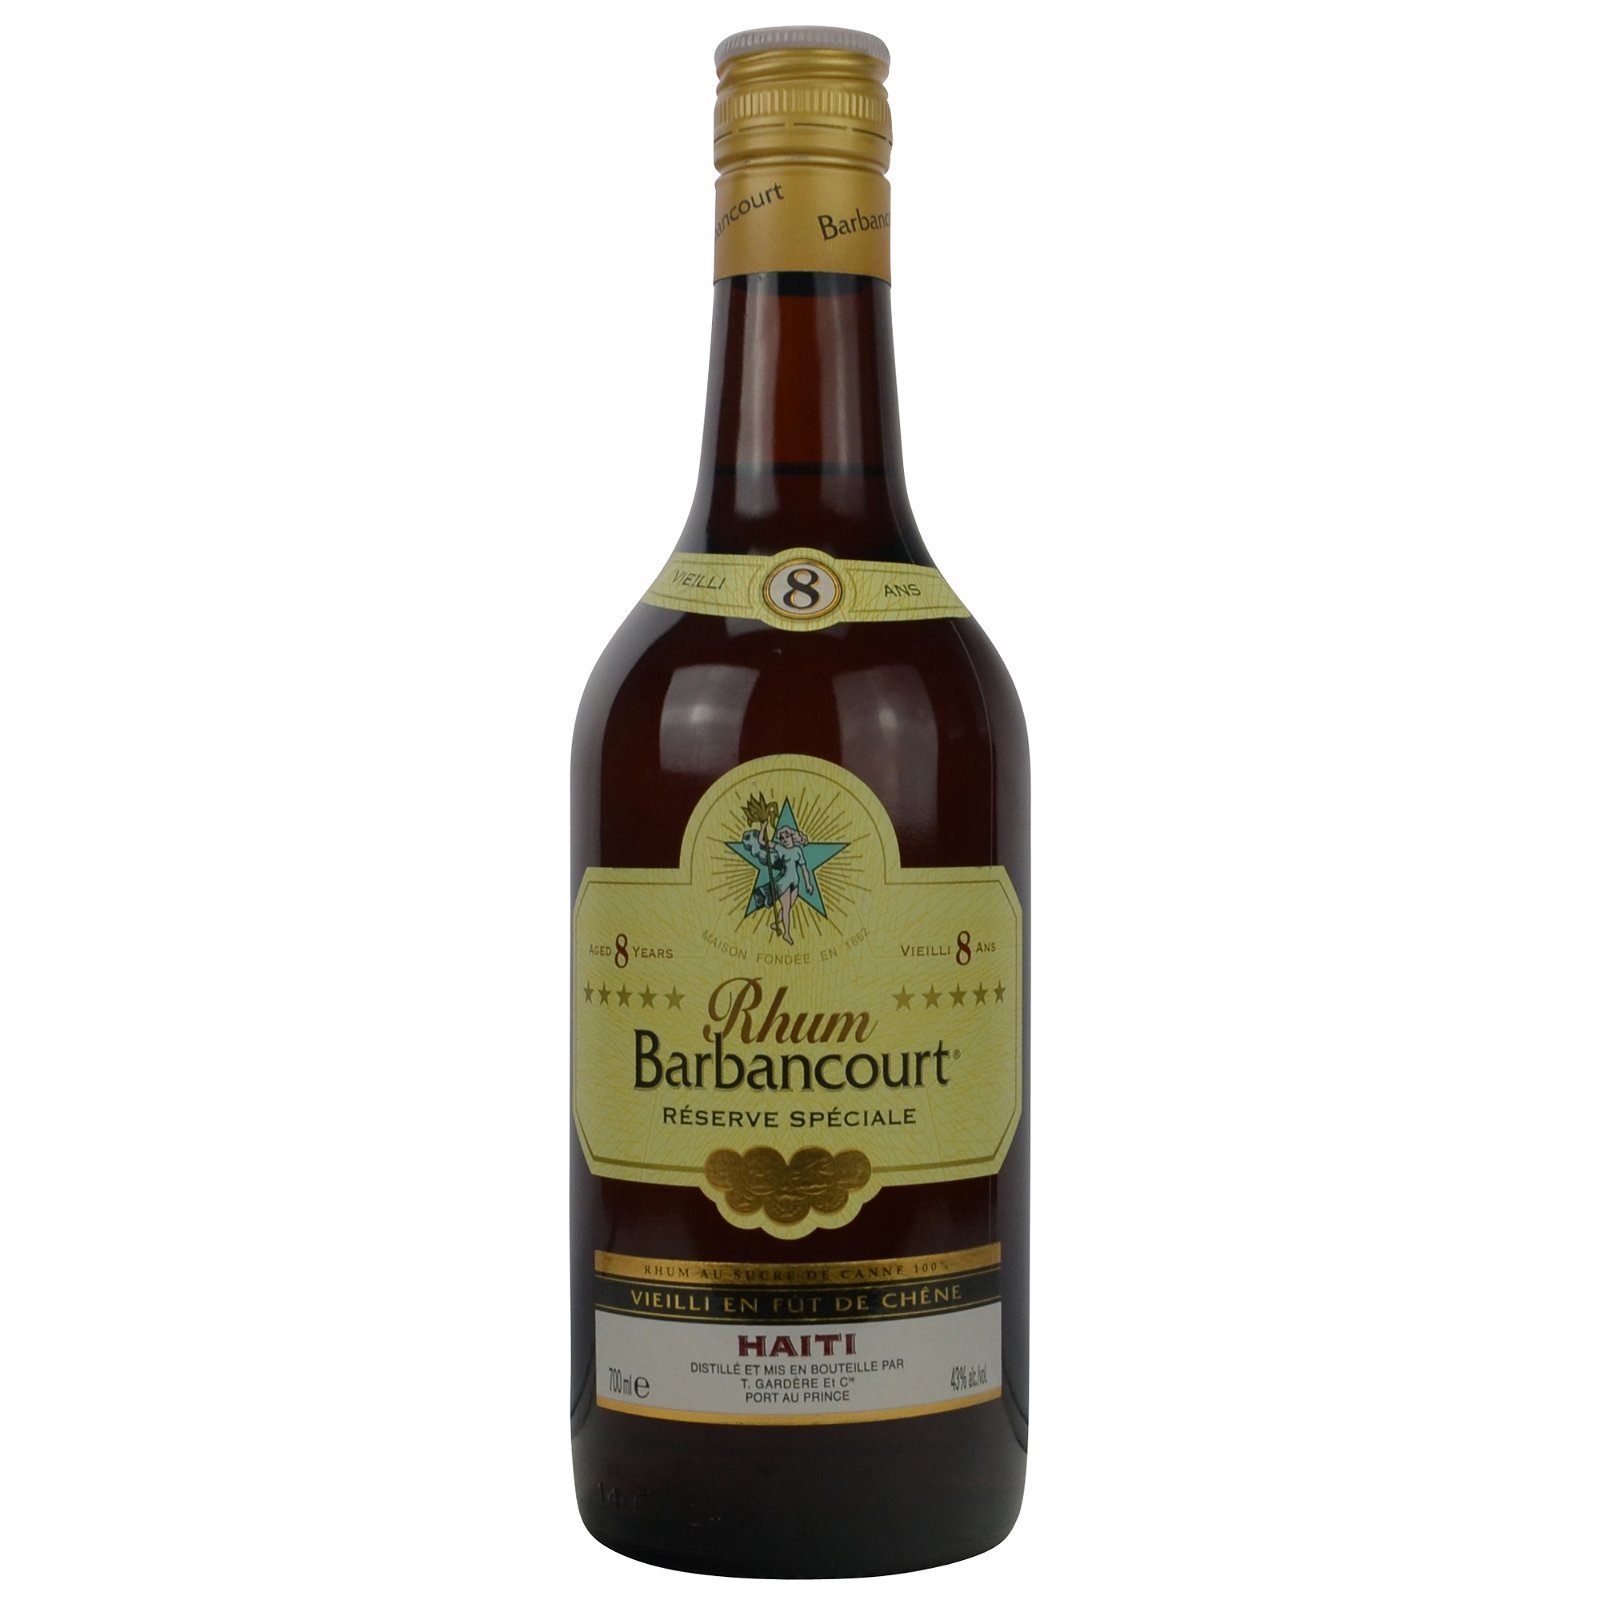 Rhum Barbancourt Reserve Speciale Aged 8 Years